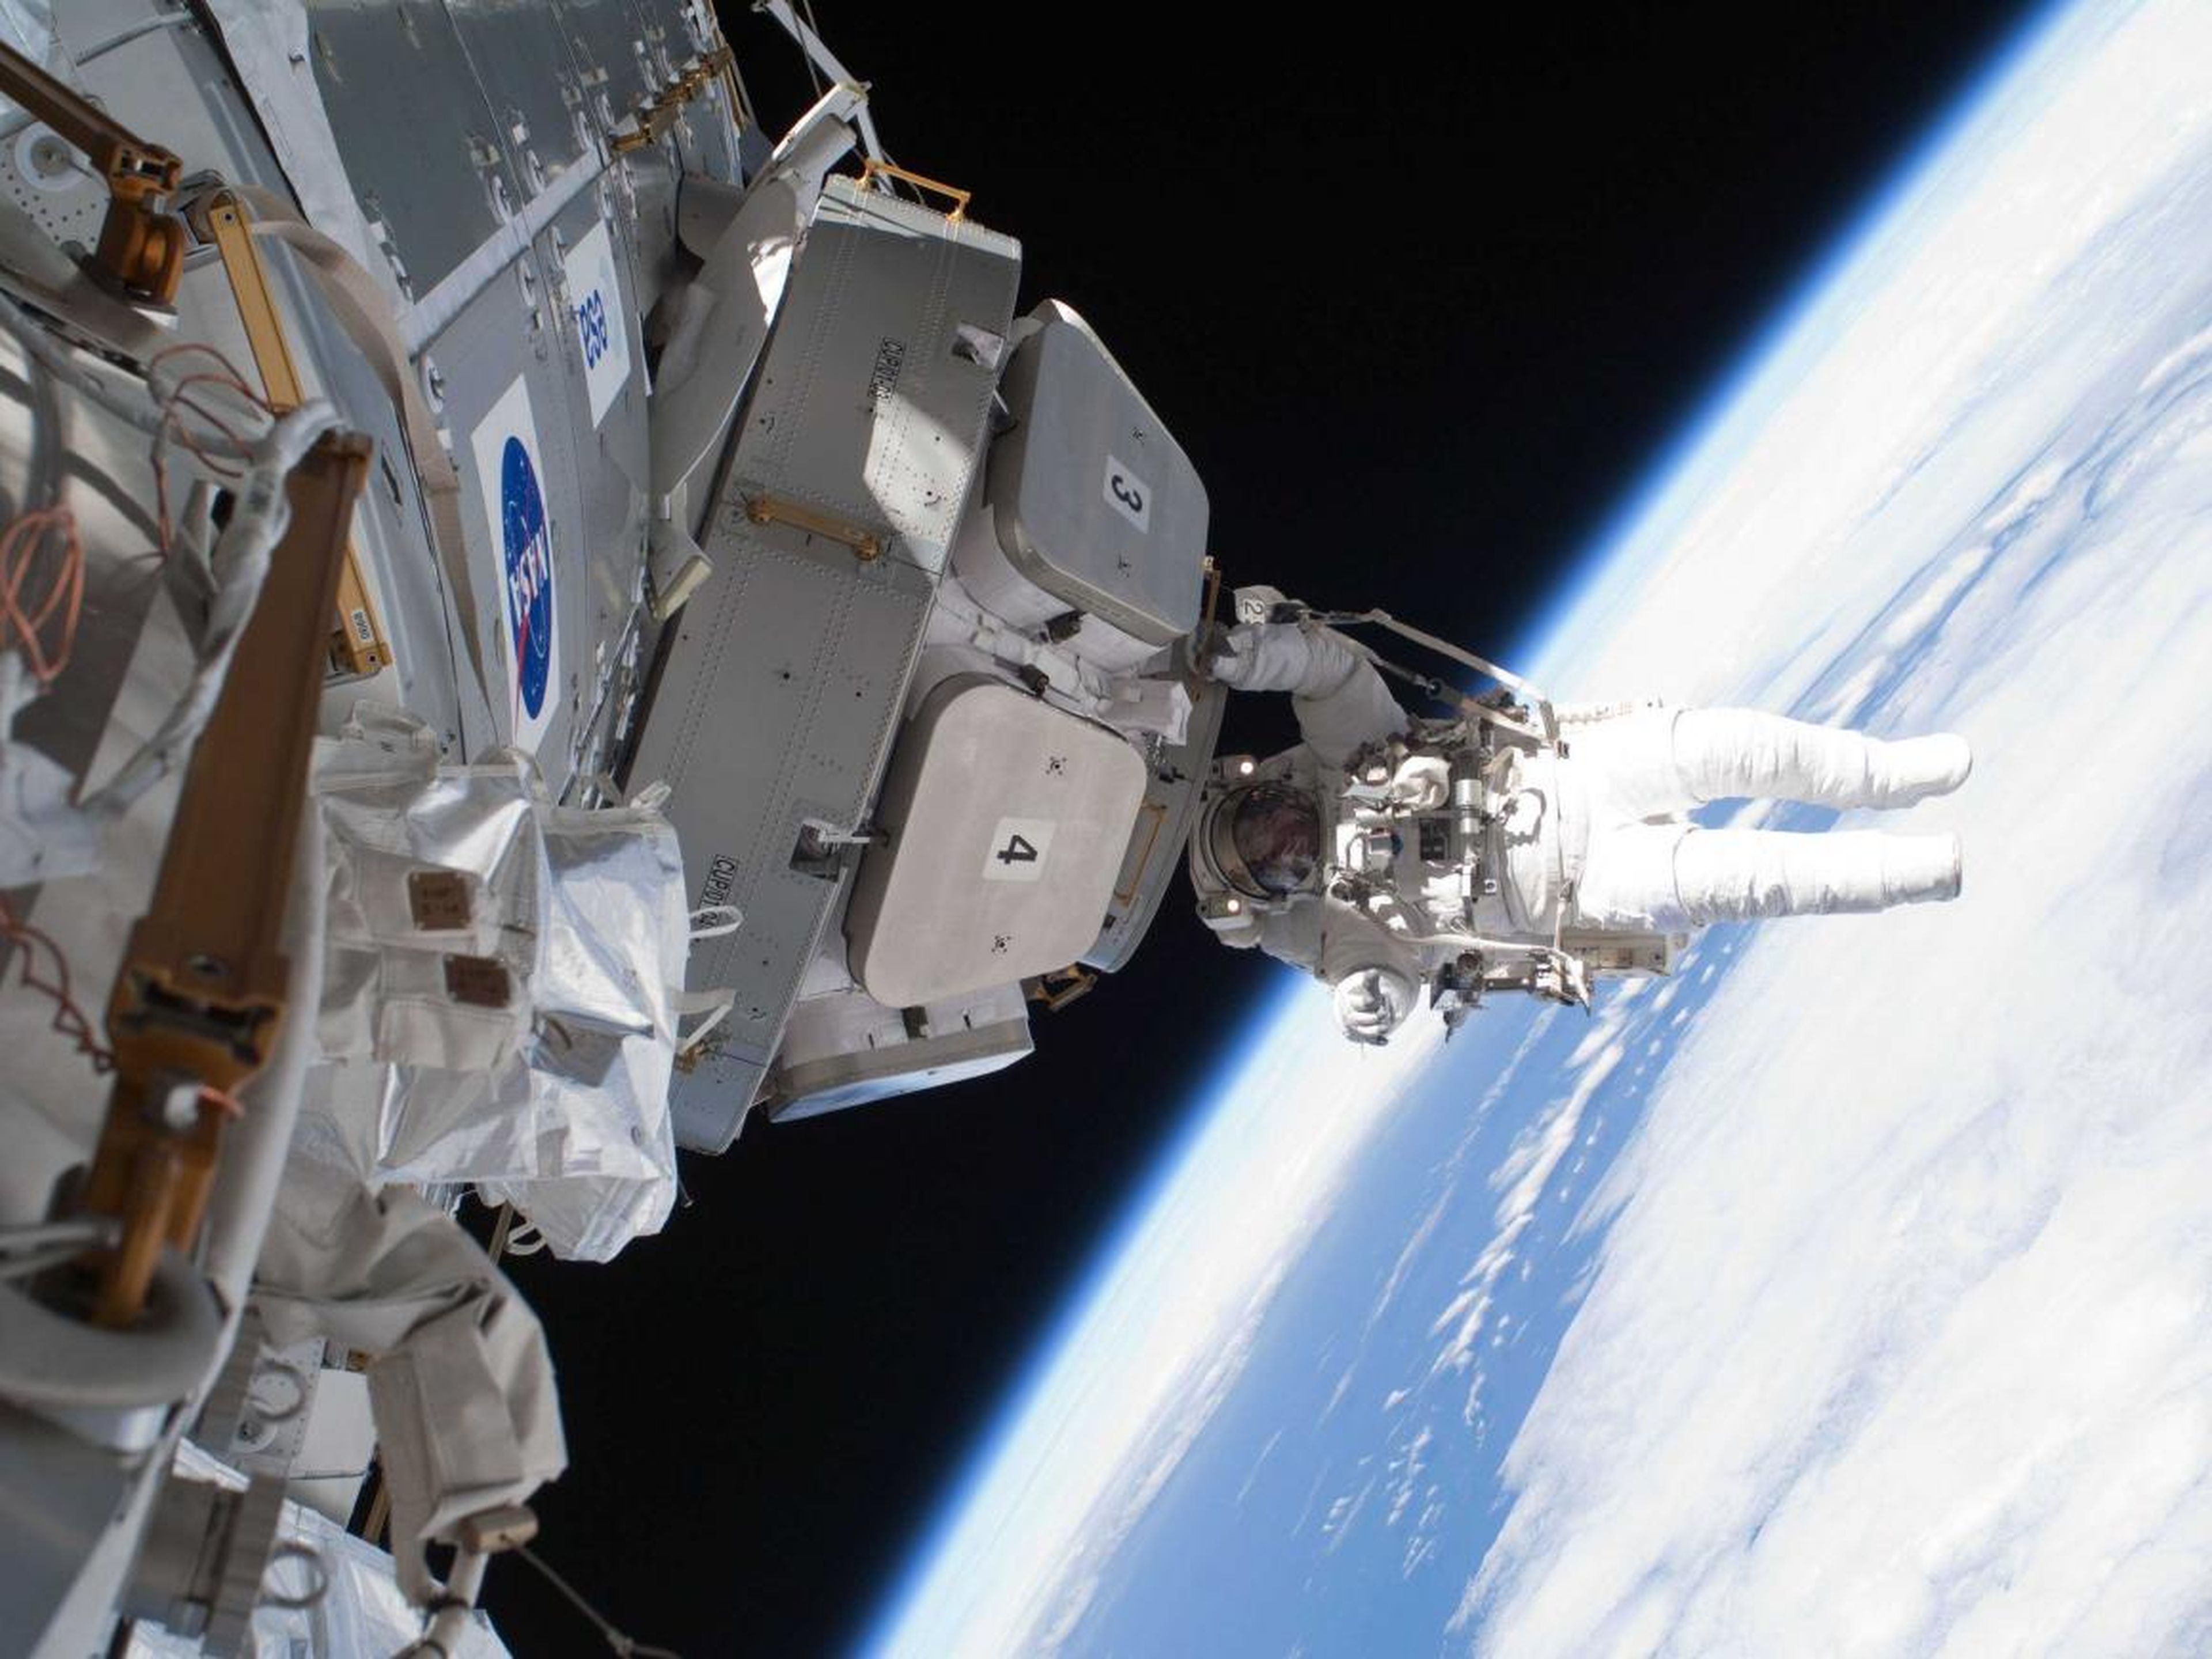 NASA astronaut Nicholas Patrick hangs on to Cupola, a module of the ISS built by the European Space Agency.